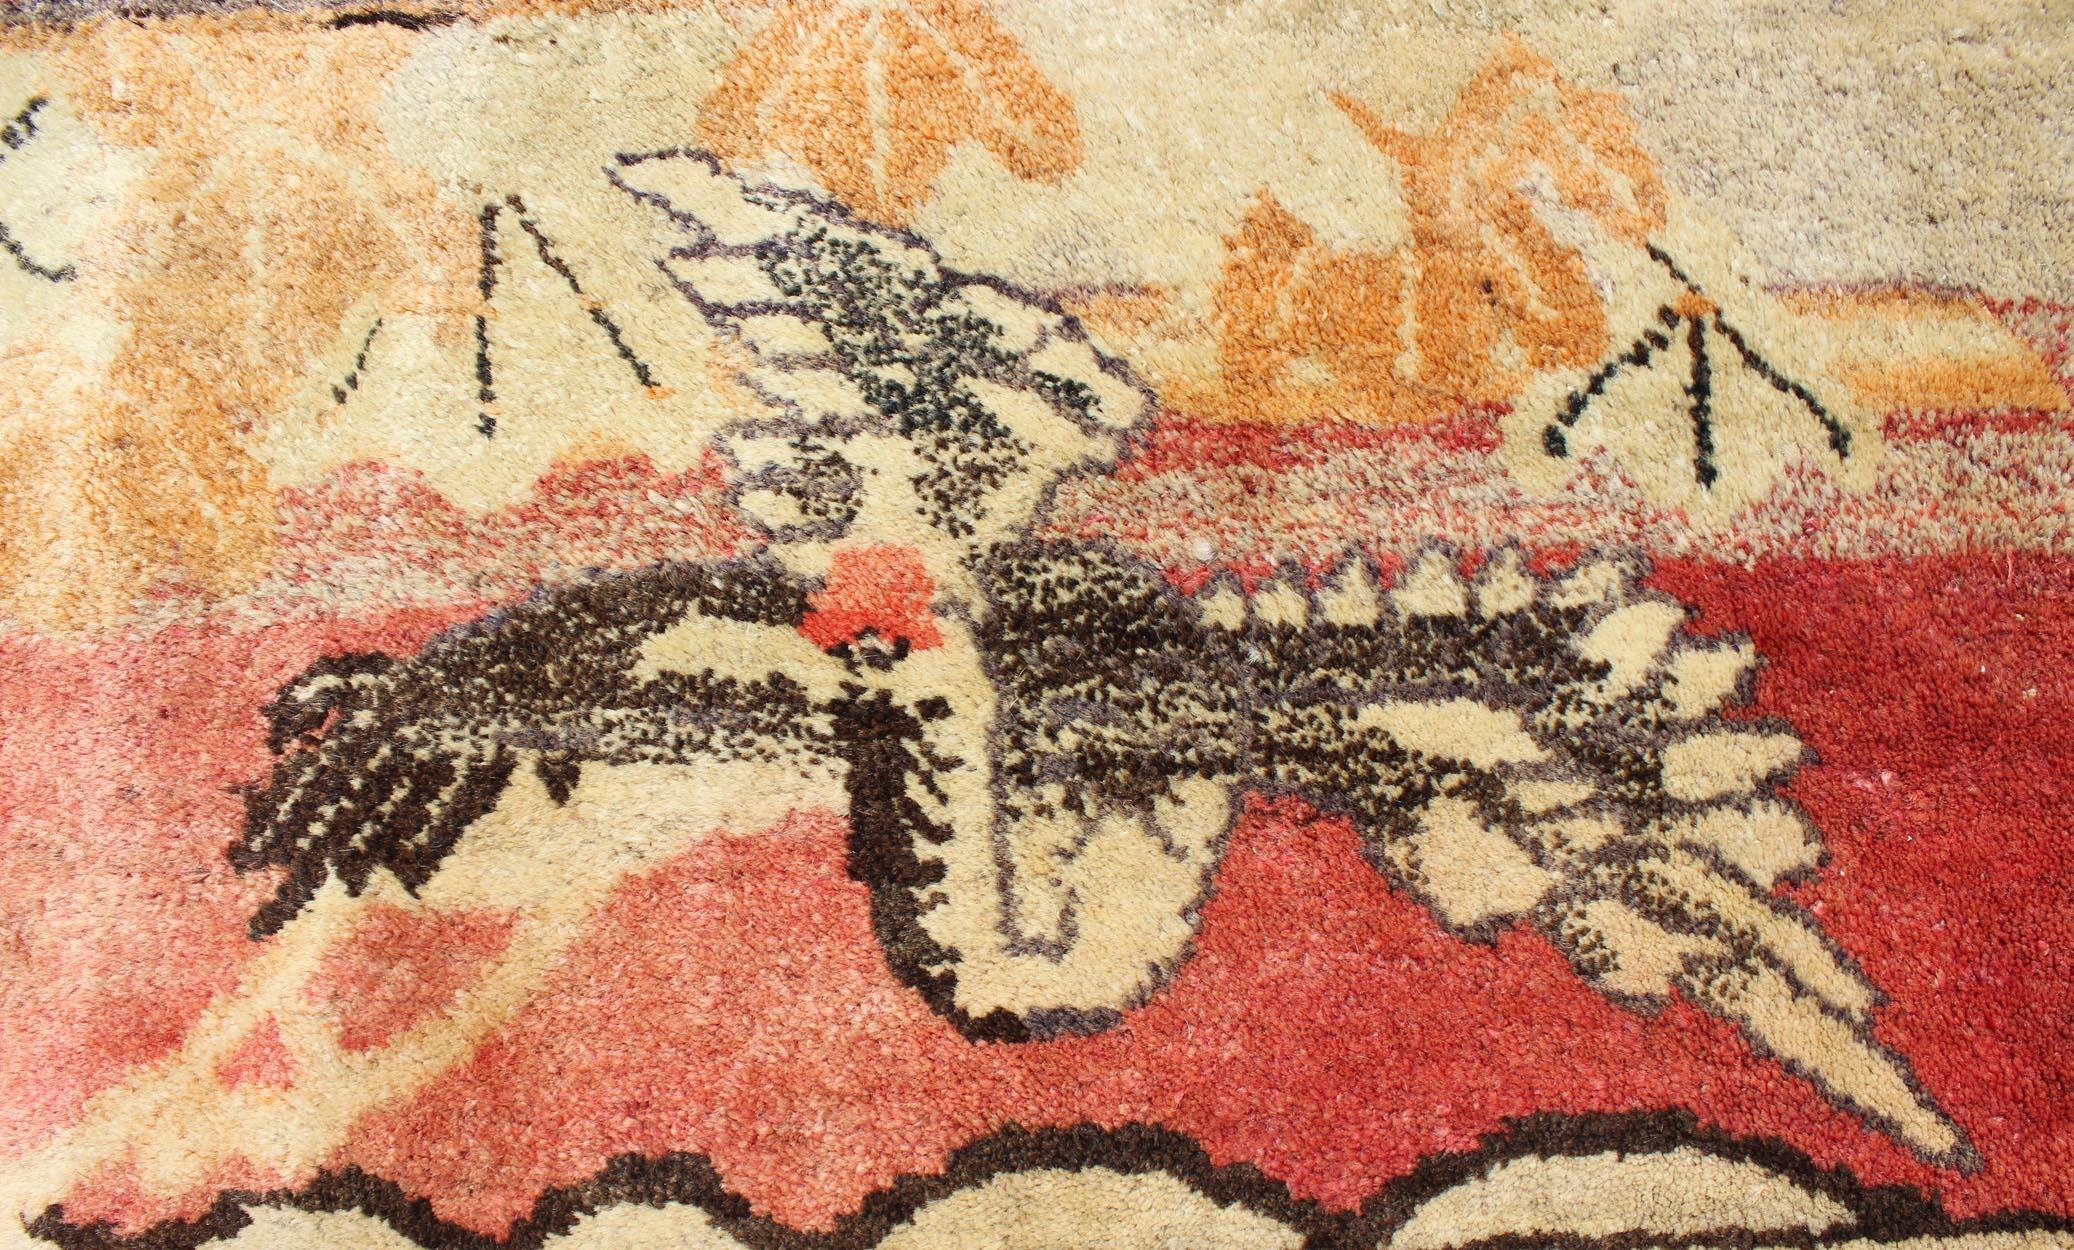 Tibetan Antique Chinese Pictorial Rug with Deer and Crane Figures For Sale